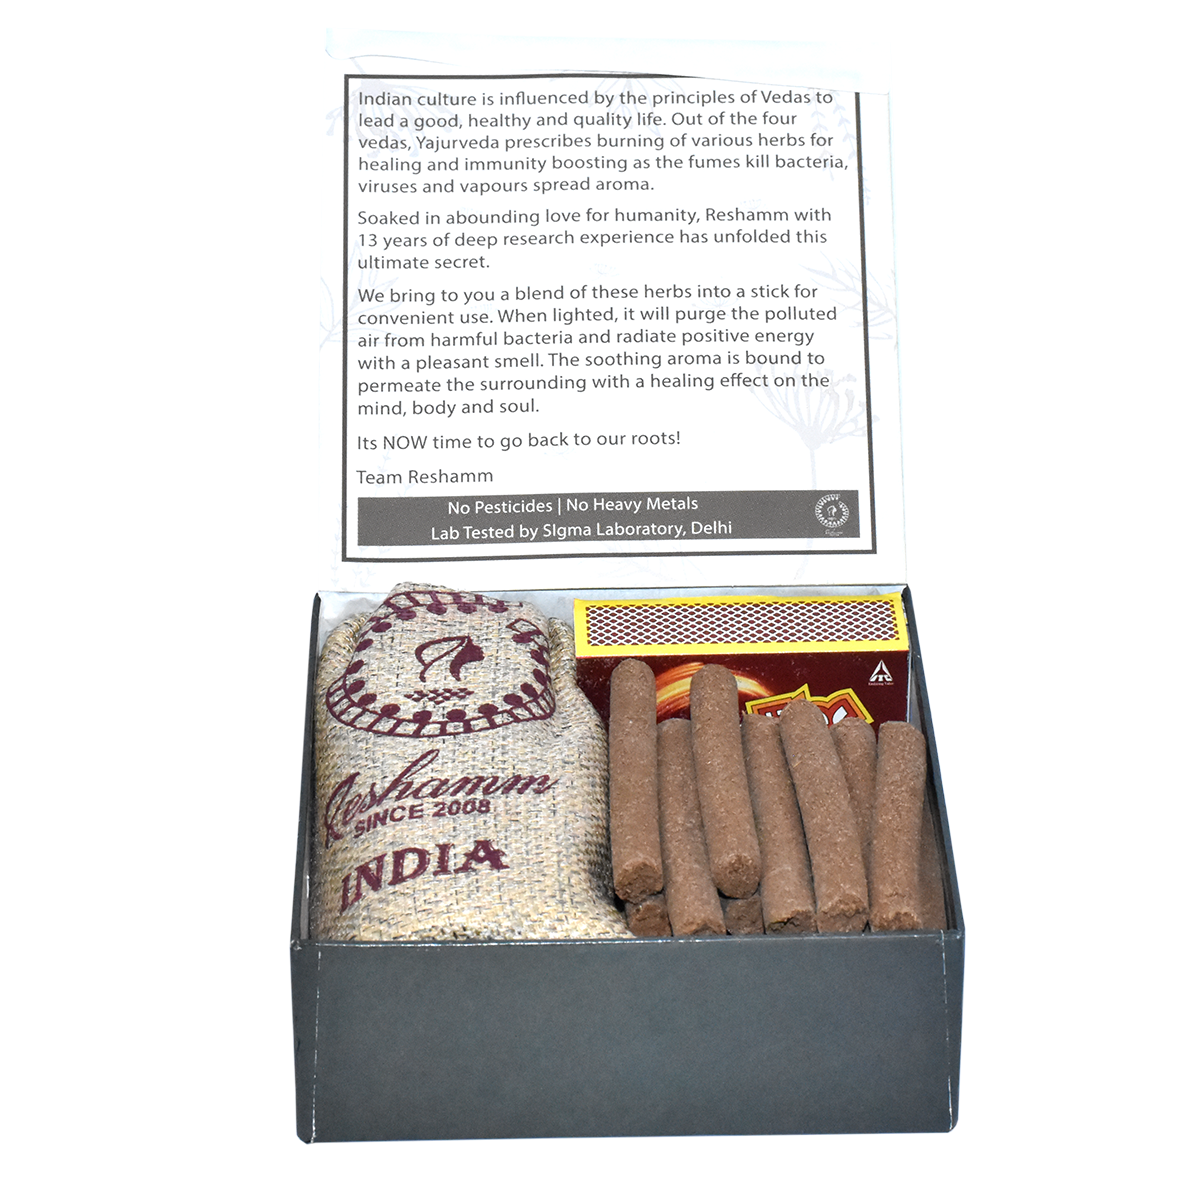 Vedic Guggul Sticks (Euro 27) made of Guggul & 26 Natural Herbs Powder. Festival gifts, Aroma Therapy, Positive vibes. Beautiful packaging. 30 sticks Pack.